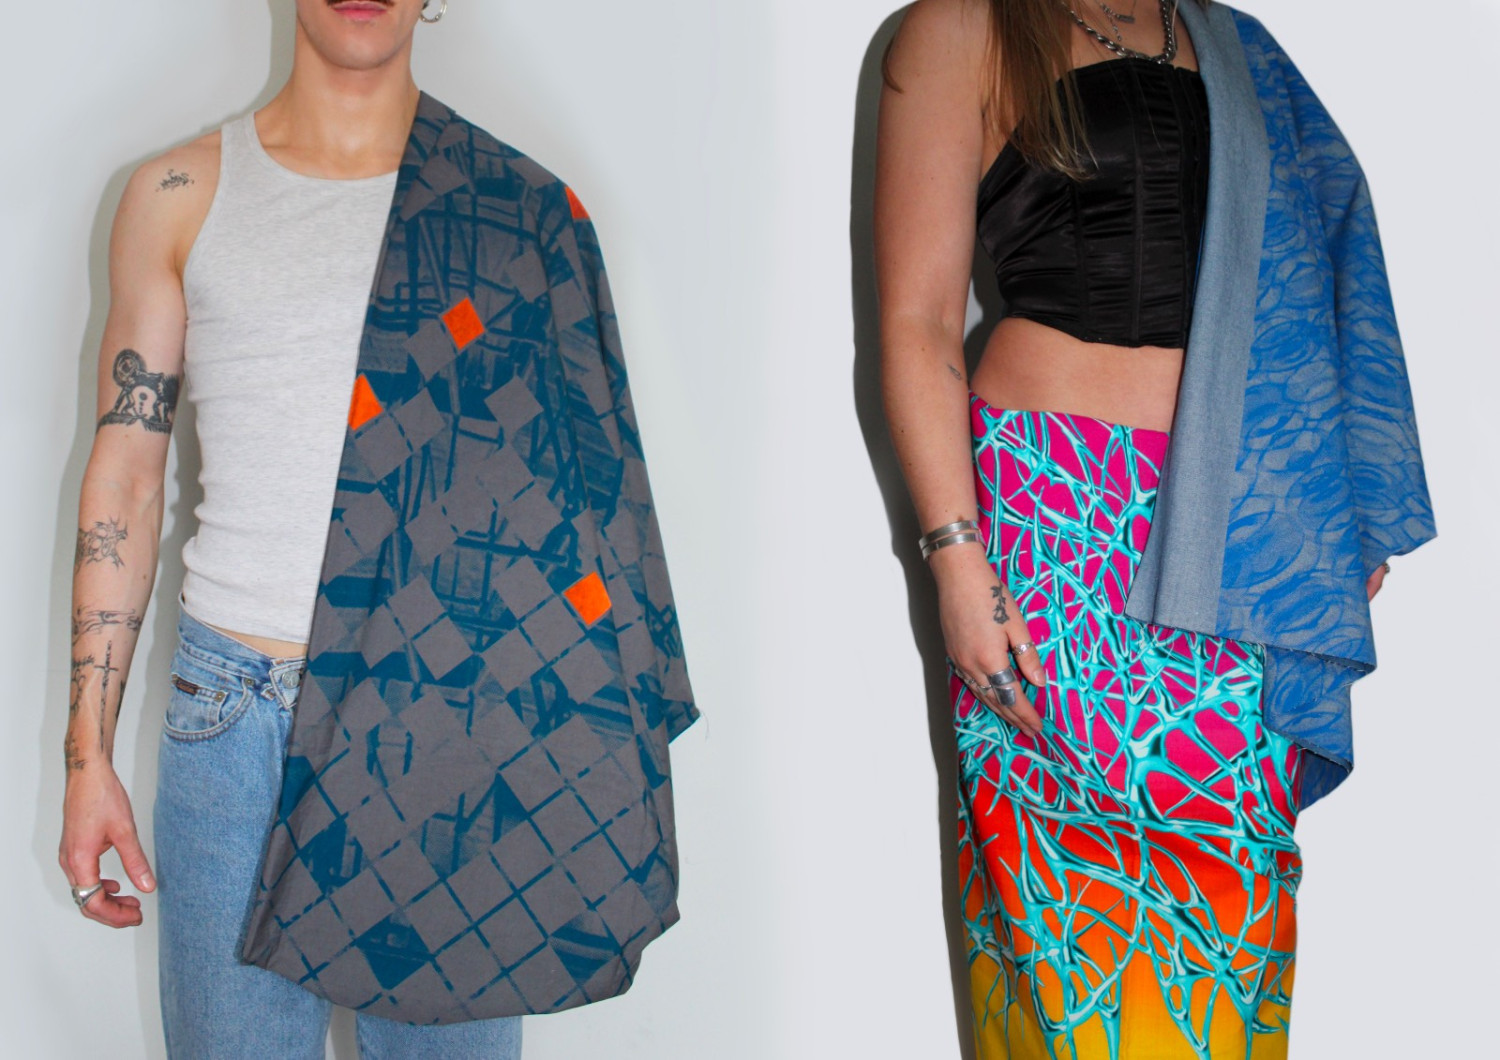 Left: Turquoise reactive and orange flock on cotton poplin; Right: Blue repeat pigment print on denim and digital print on cotton poplin